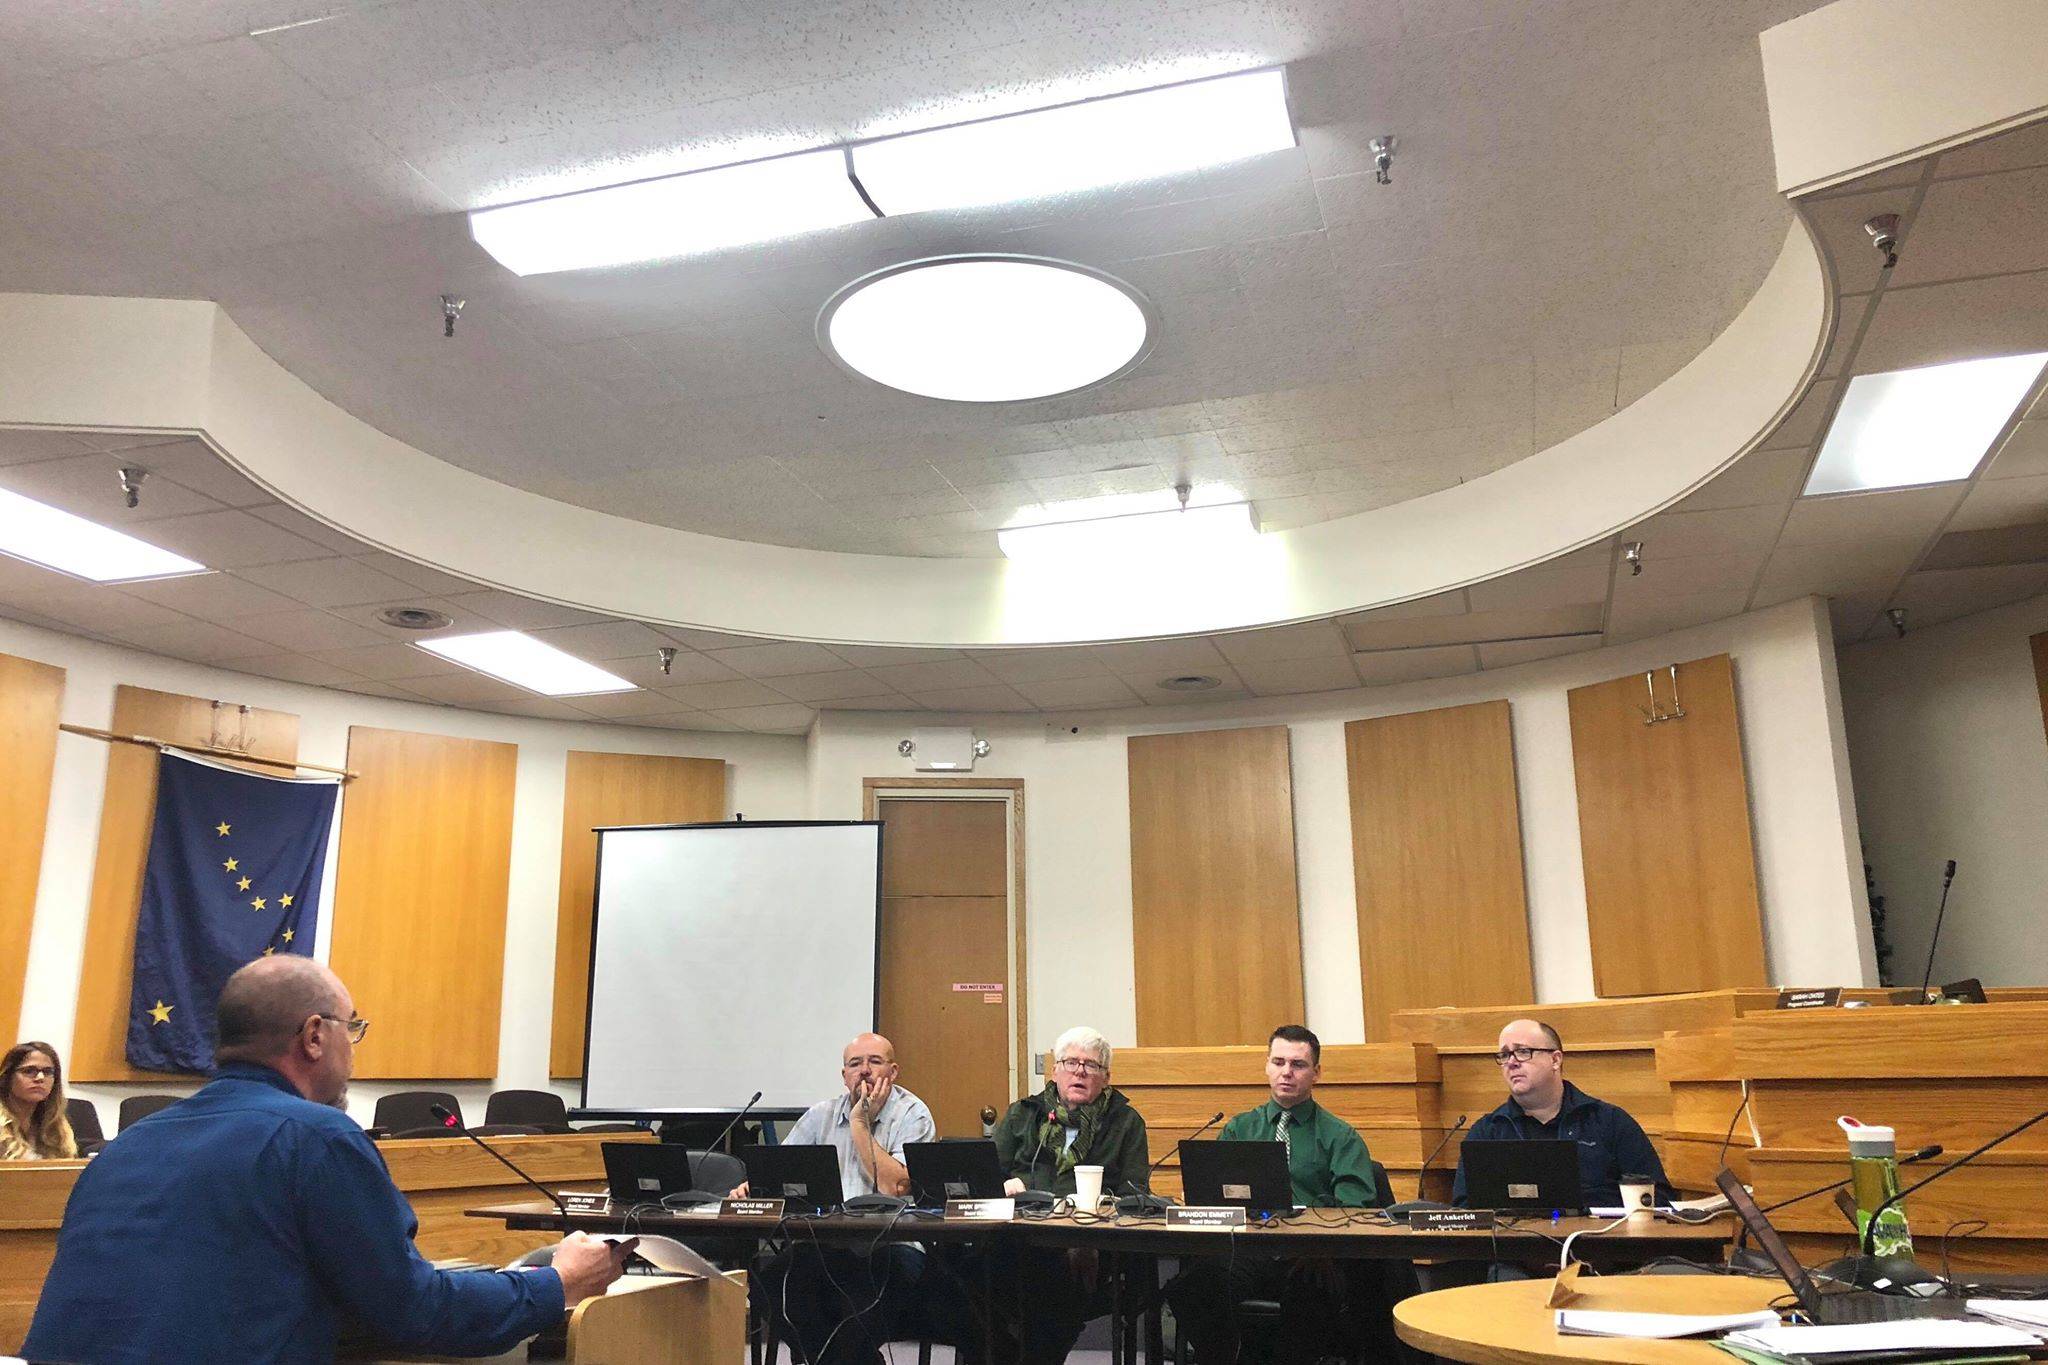 Members of the public give testimony at the Marijuana Control Board, who met in Kenai, Alaska for the first time on Tuesday, Oct. 15, 2018. (Photo by Victoria Petersen/Peninsula Clarion)